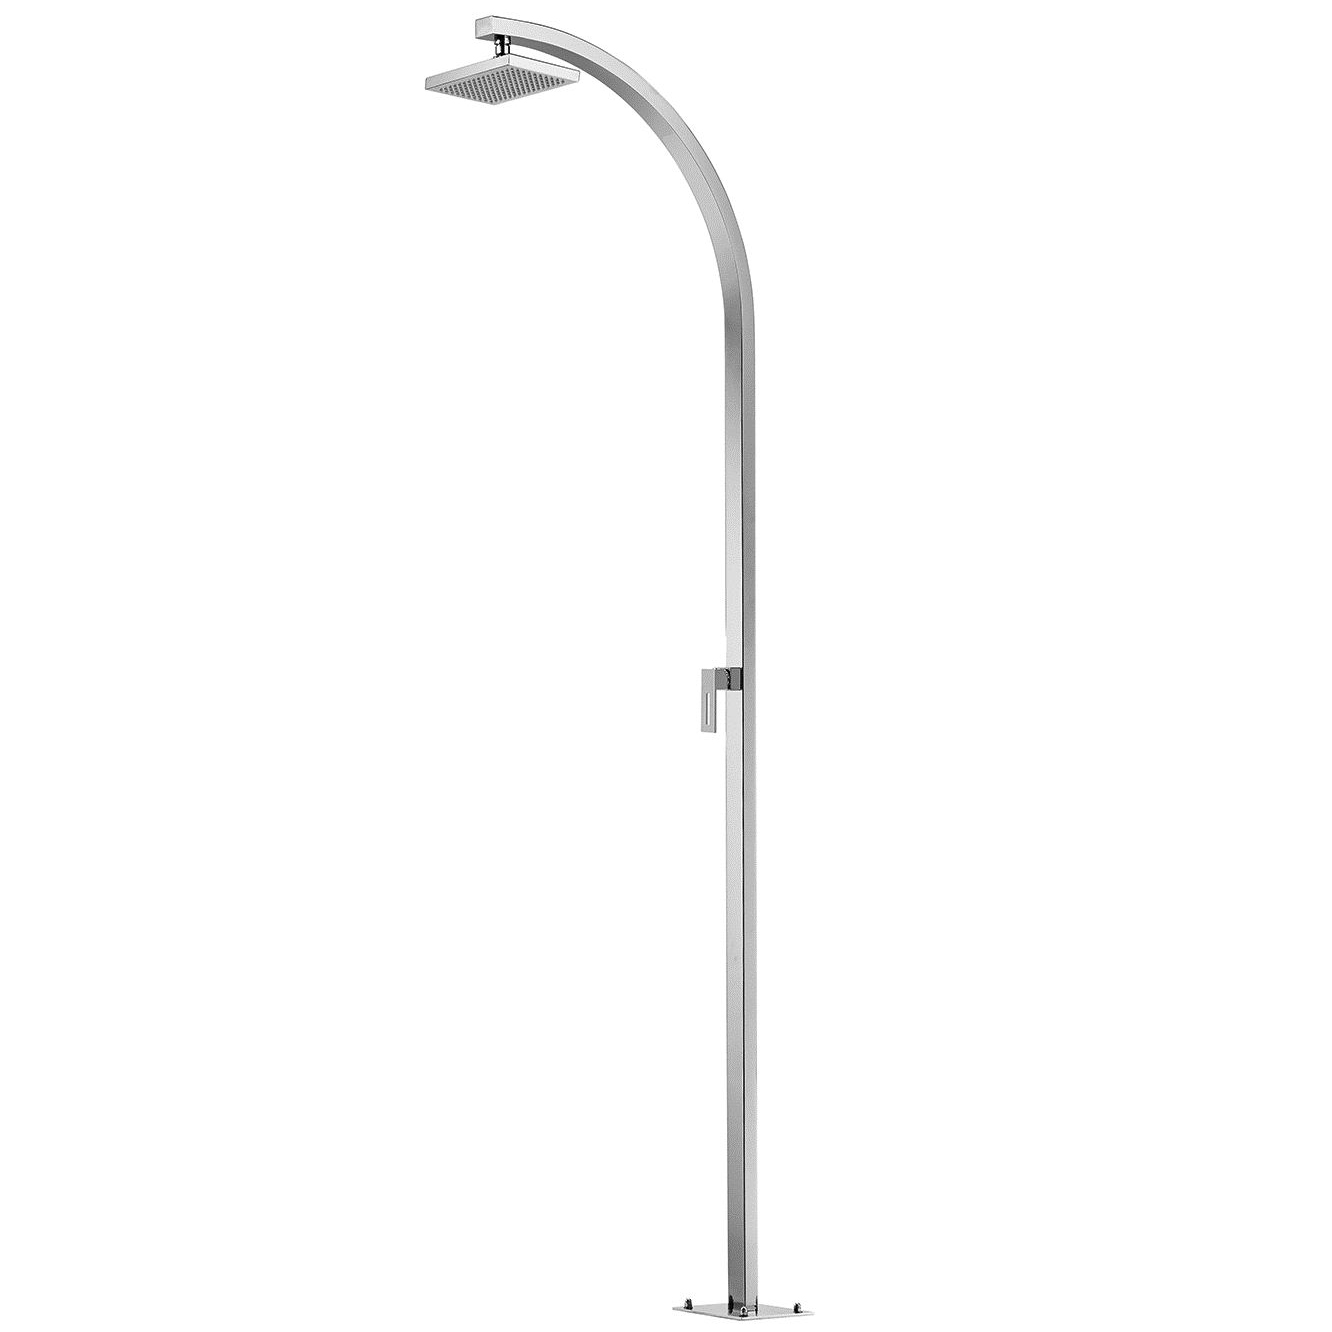 Arko Q53 316 Marine Grade Stainless Steel Free Standing Hot and Cold Shower Column